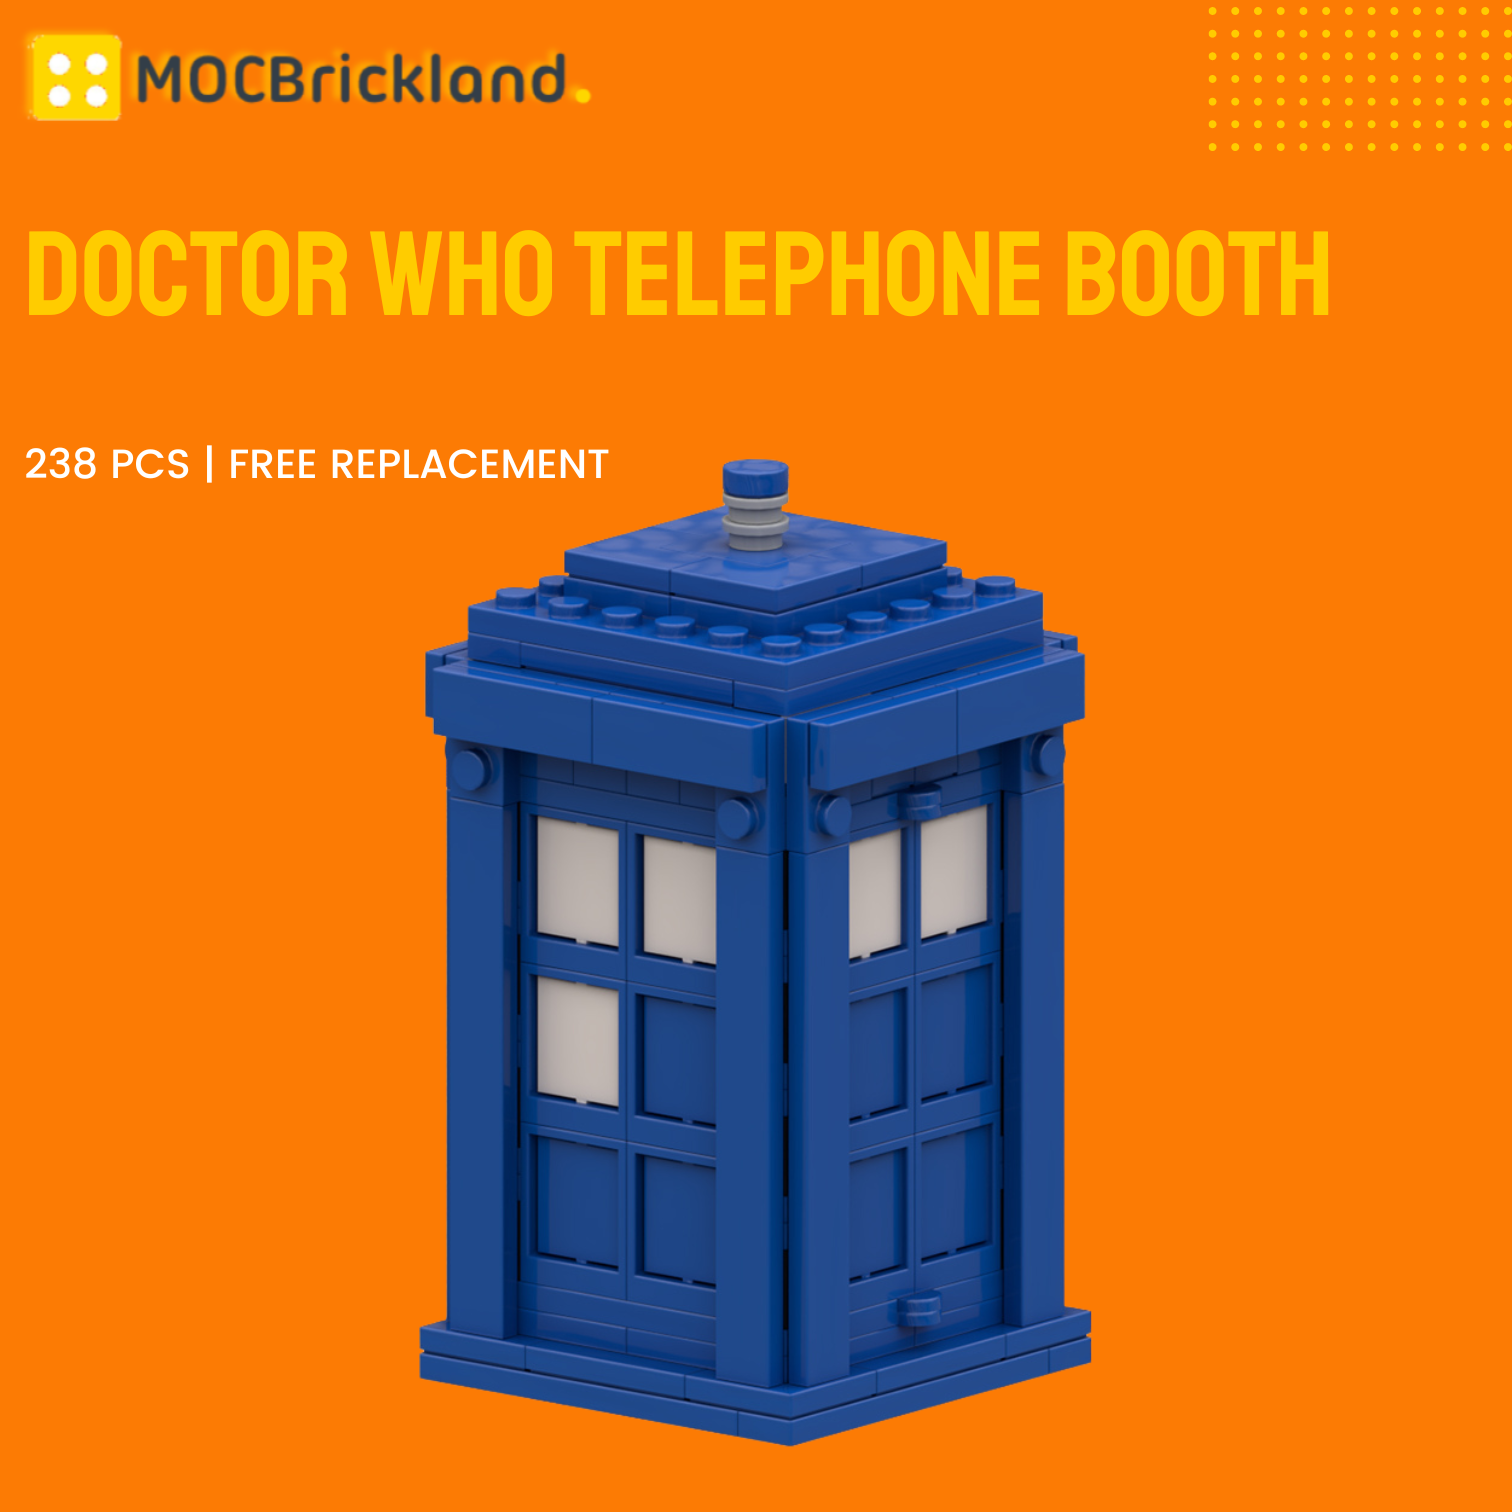 Creator MOC-89570 Doctor Who Telephone Booth MOCBRICKLAND